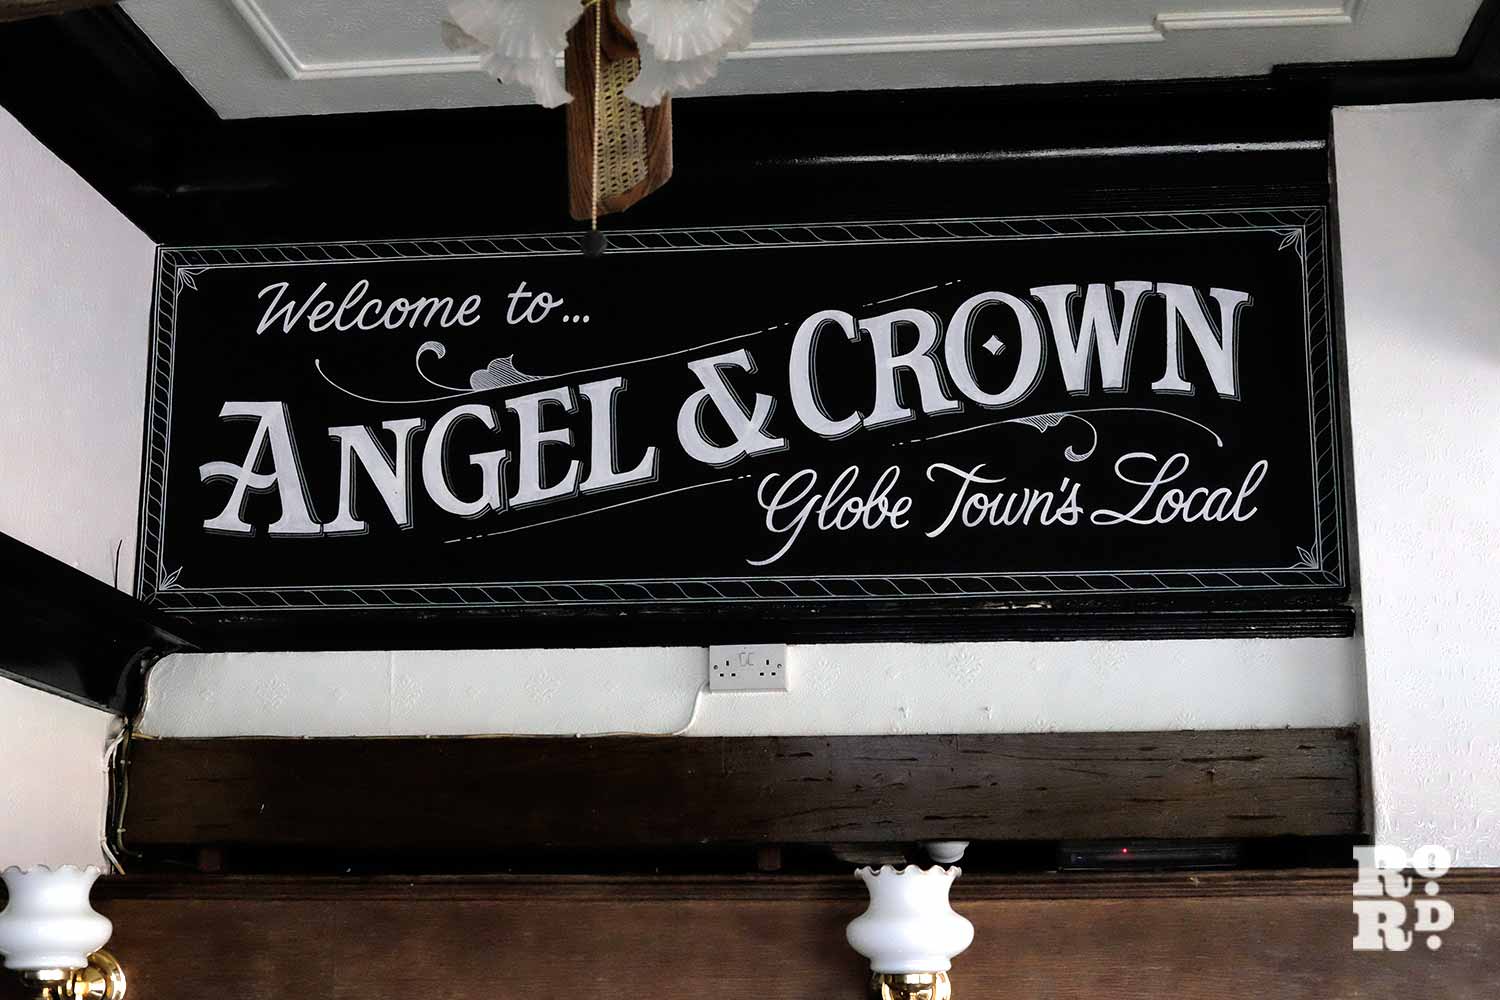 Signage inside Angel & Crown pub on Roman Road, painted by Luminor signwriters